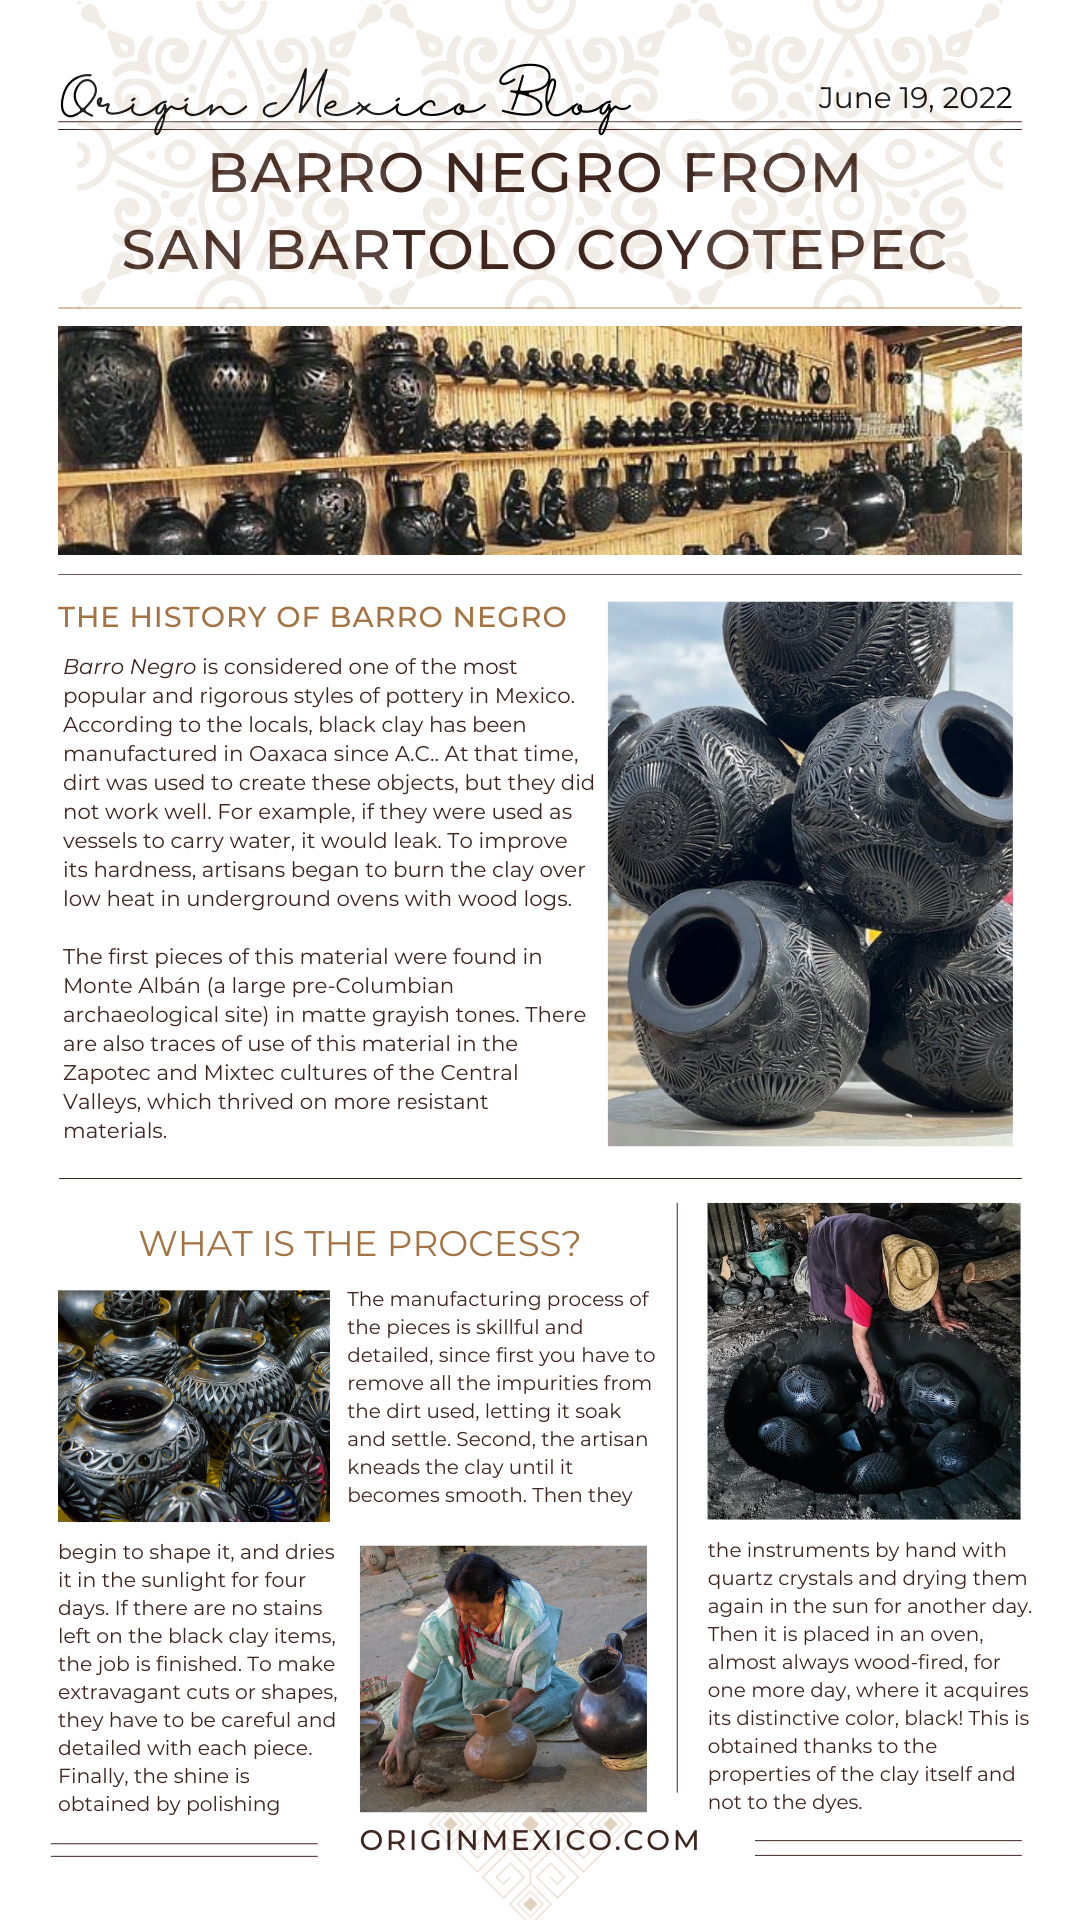 Barro Negro is considered one of the most popular and rigorous styles of pottery in Mexico. According to the locals, black clay has been manufactured in Oaxaca since A.C.. At that time, dirt was used to create these objects, but they did not work well. For example, if they were used as vessels to carry water, it would leak. To improve its hardness, artisans began to burn the clay over low heat in underground ovens with wood logs.  The first pieces of this material were found in Monte Albán (a large pre-Columbian archaeological site) in matte grayish tones. There are also traces of use of this material in the Zapotec and Mixtec cultures of the Central Valleys, which thrived on more resistant materials.